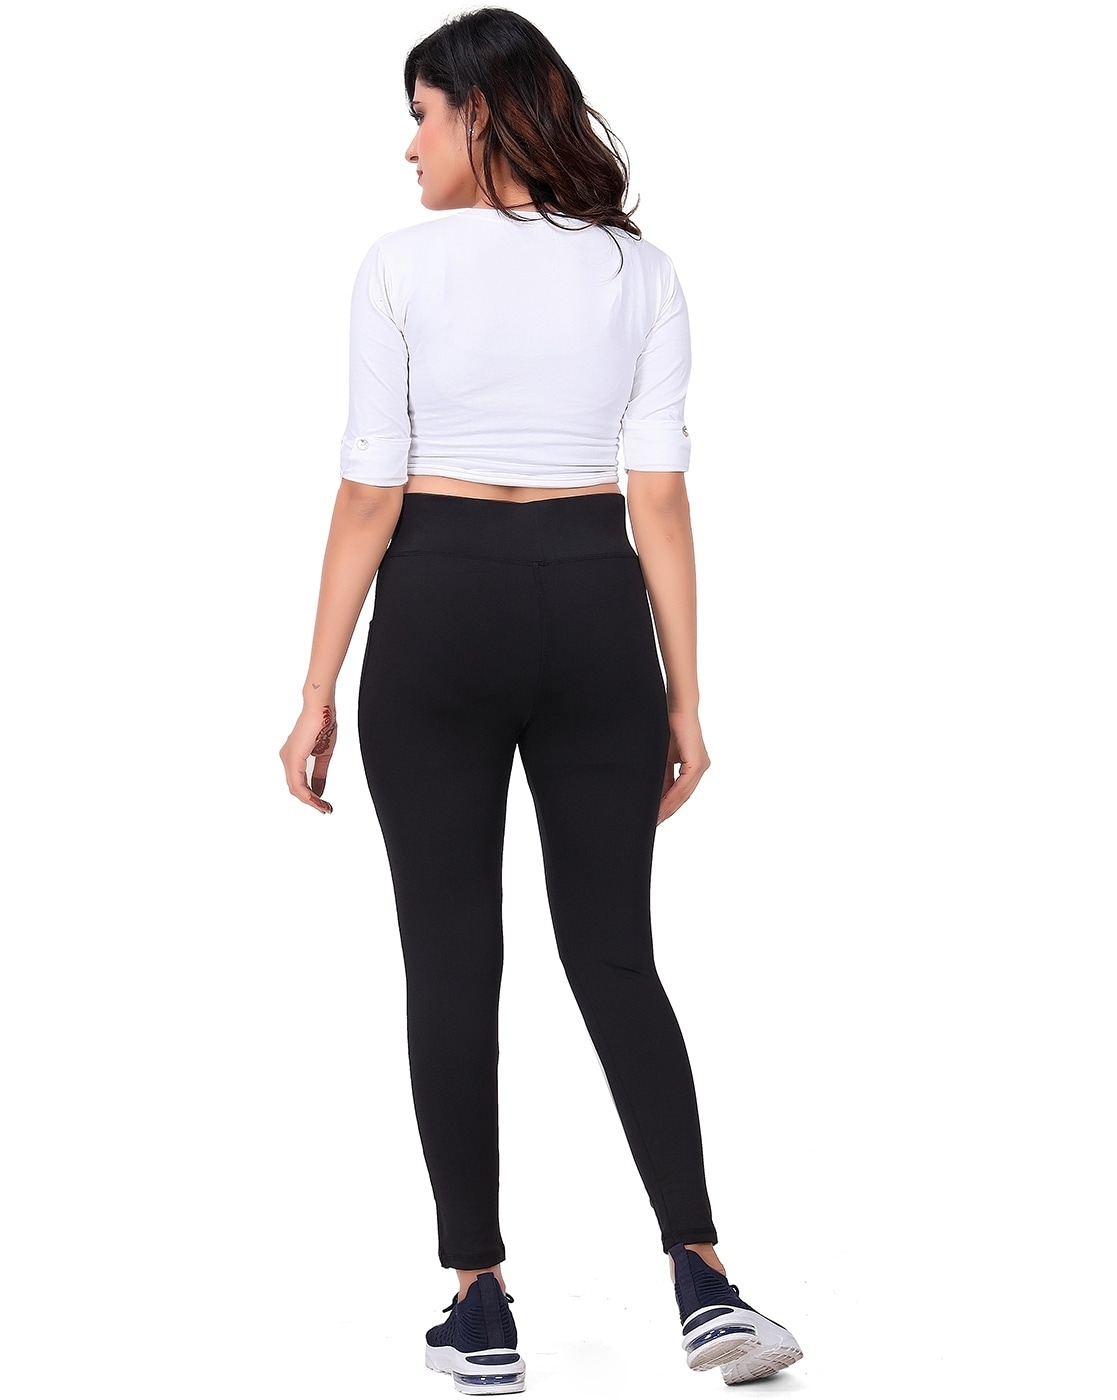 The Black Leggings I Never Hesitate to Wear as Pants | Glamour